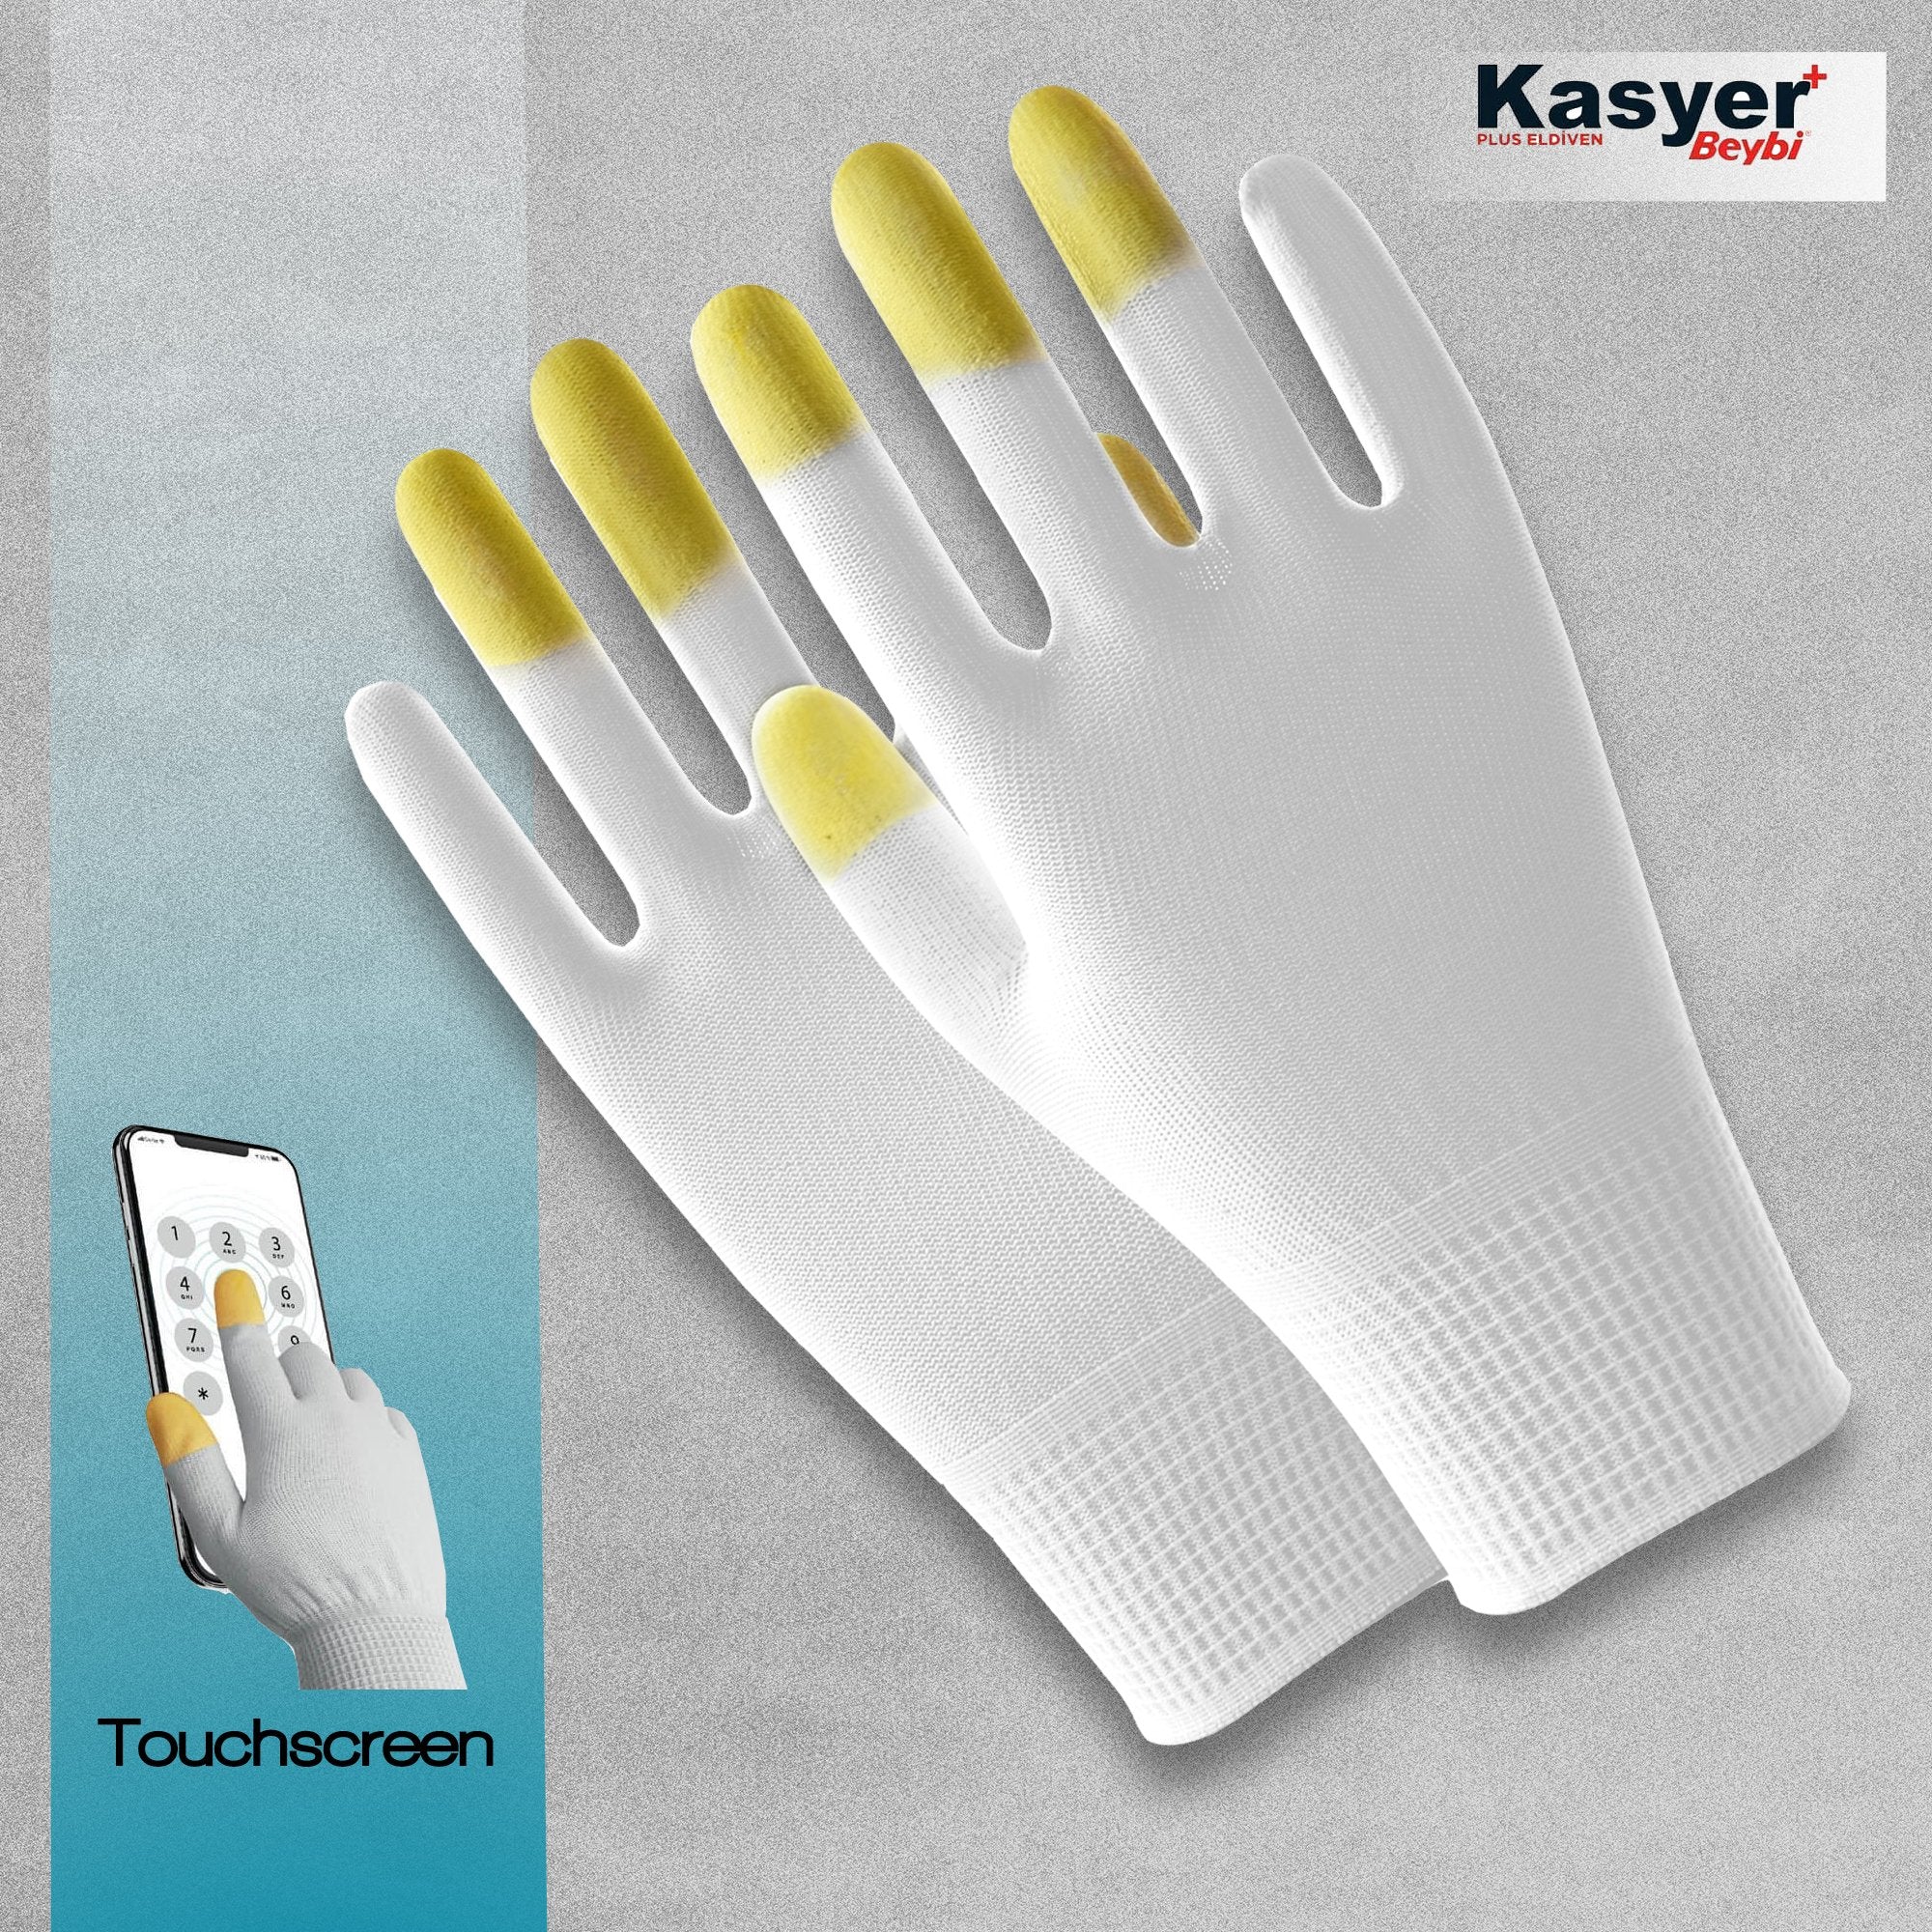 Kasyer Touch Screen Plus Polyester White Gloves L/XL - Pack of 3 Pairs